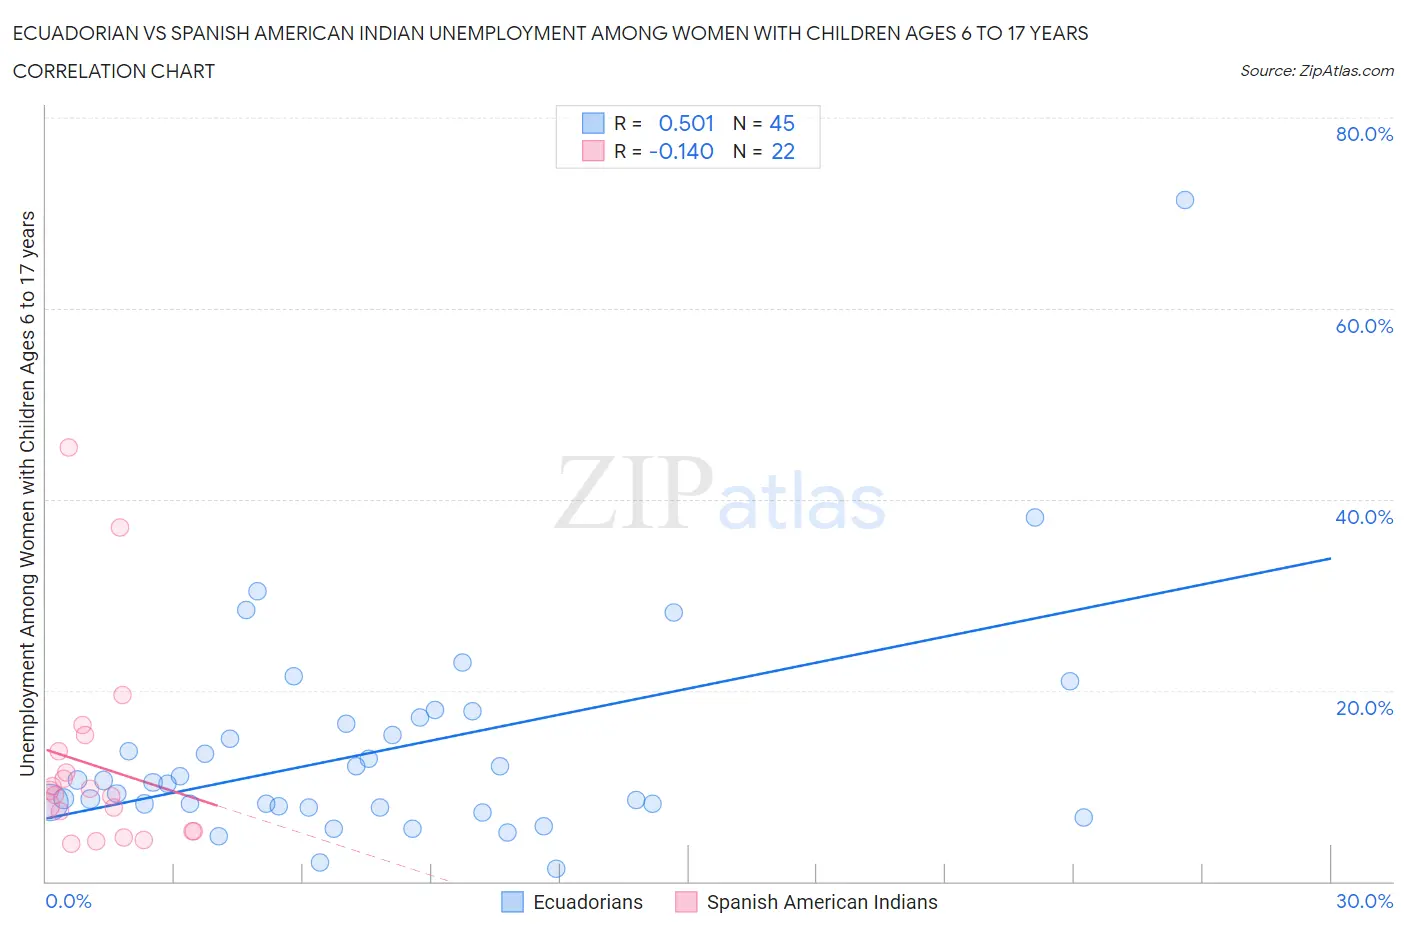 Ecuadorian vs Spanish American Indian Unemployment Among Women with Children Ages 6 to 17 years